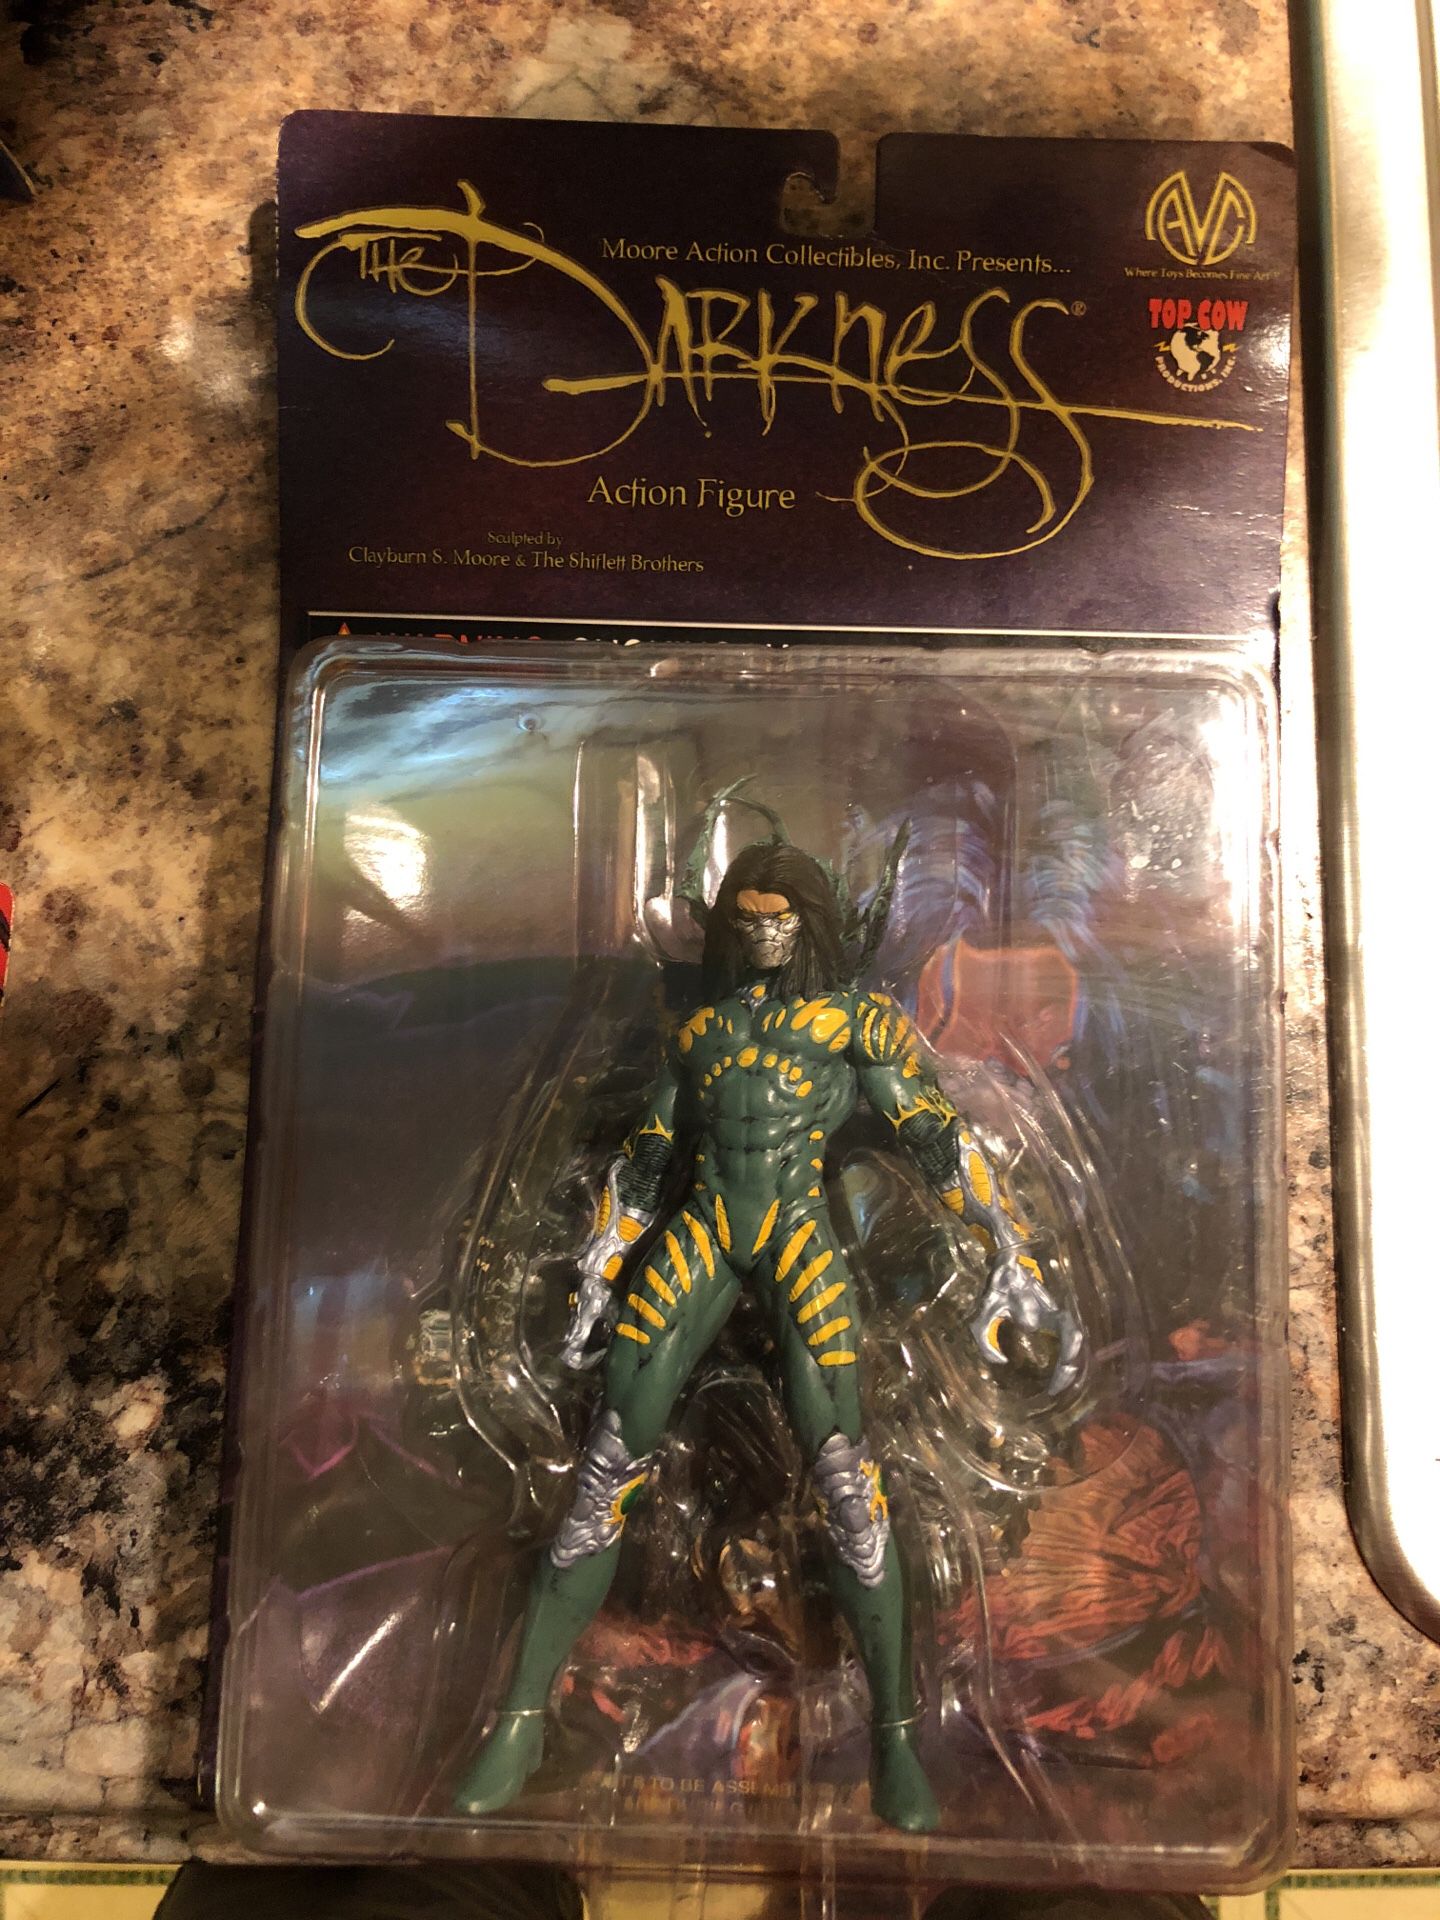 The Darkness action figure- Clayburn Moore